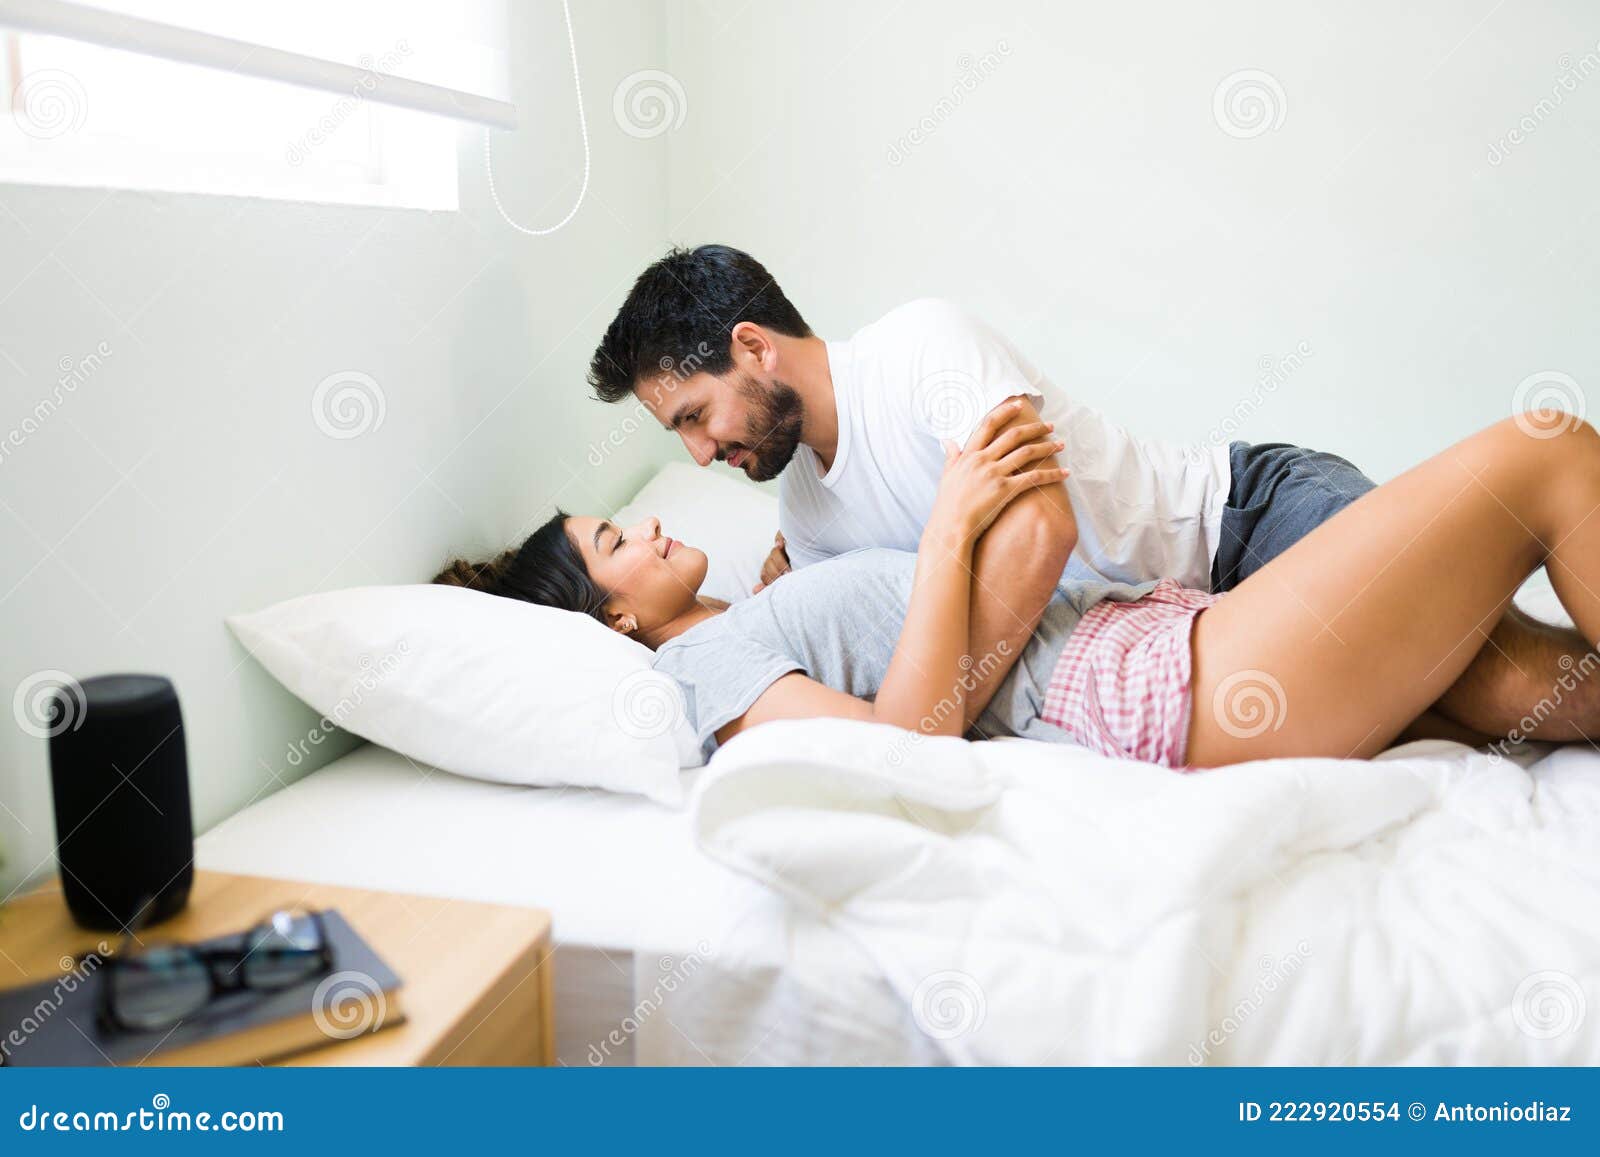 Seductive Boyfriend Smiling To His Girlfriend in Bed Stock Photo image